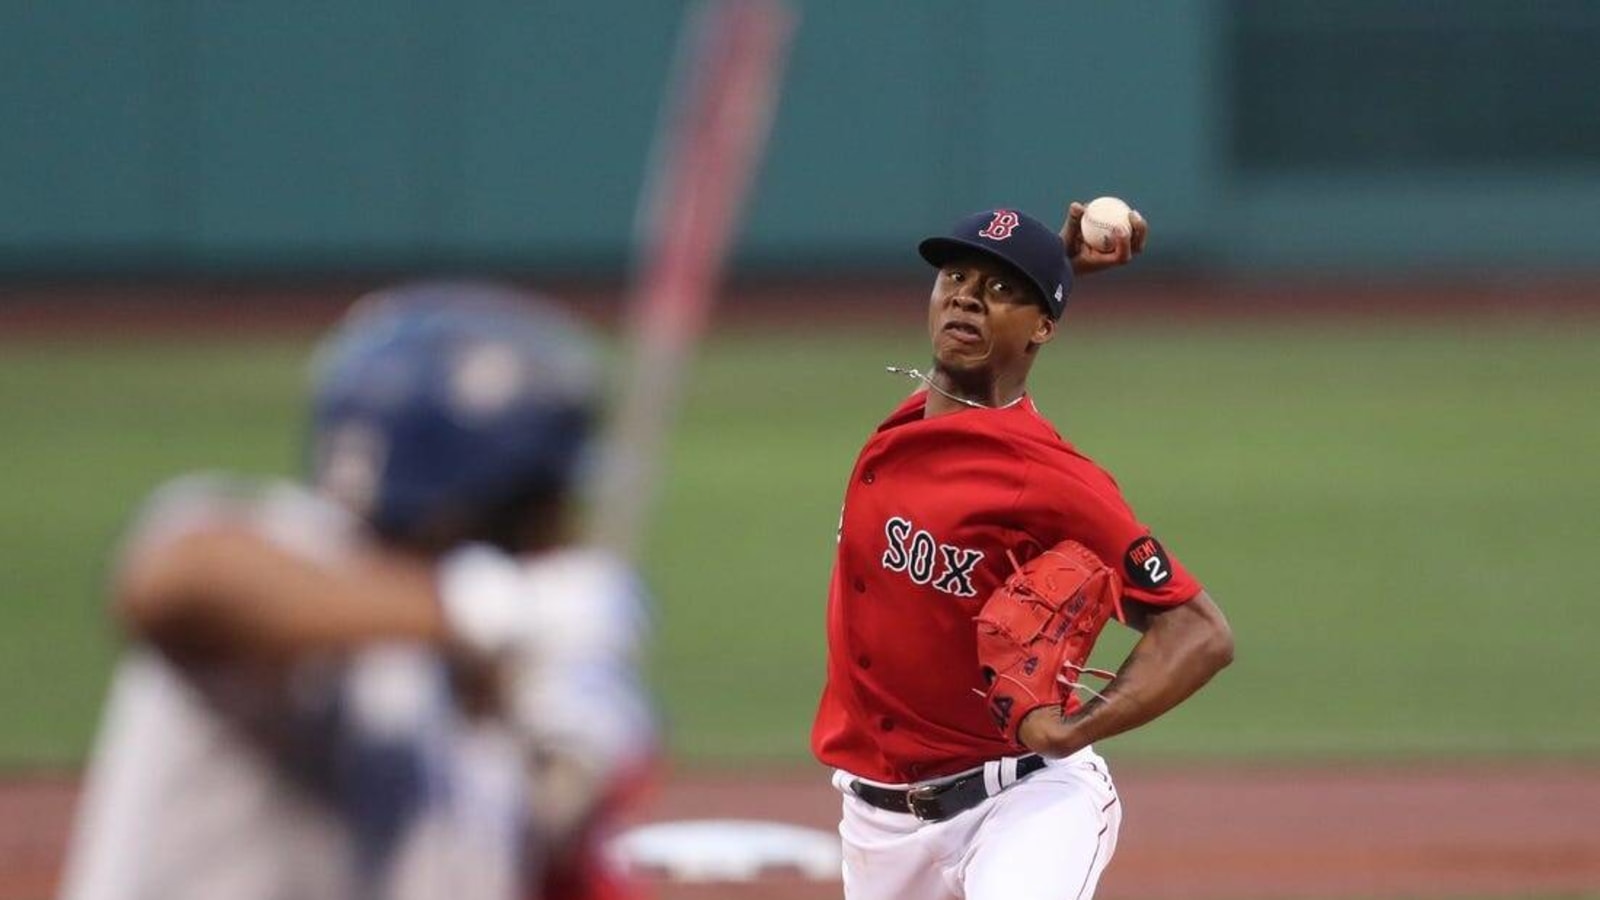 Boston Red Sox vs. Minnesota Twins prediction and odds Mon., 8/29: Brayan Bello shoots for first major league win